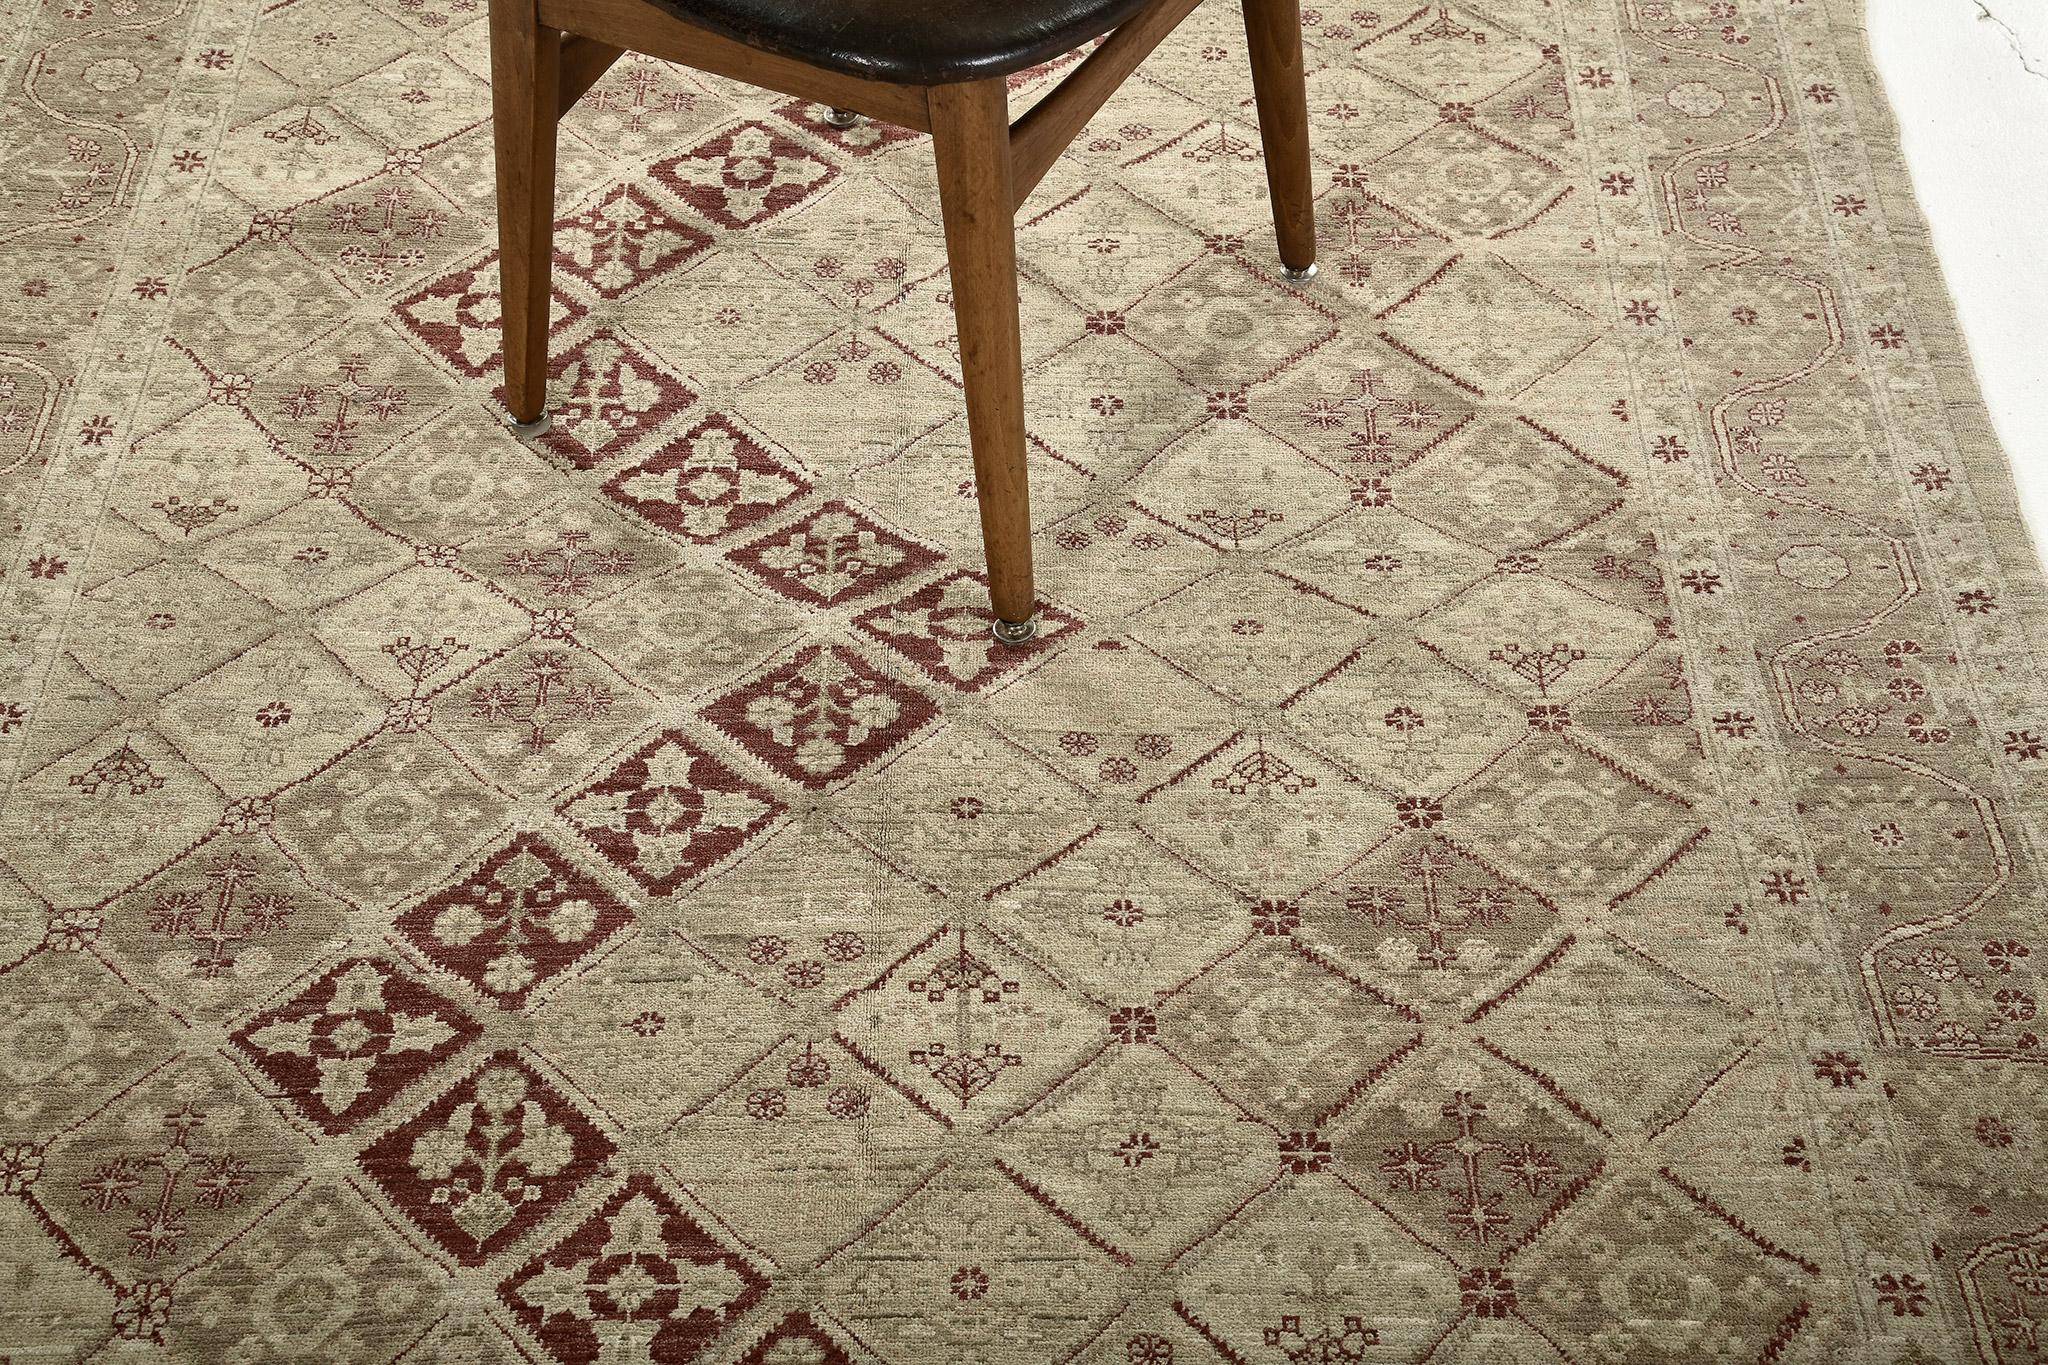 A sophisticated Classic Panel Design in Fable Collection revival rug that is impeccably woven with various botanical elements in the soothing muted combinations of ivory, sand, taupe and ruby red accent. This refined rug charms with ease and